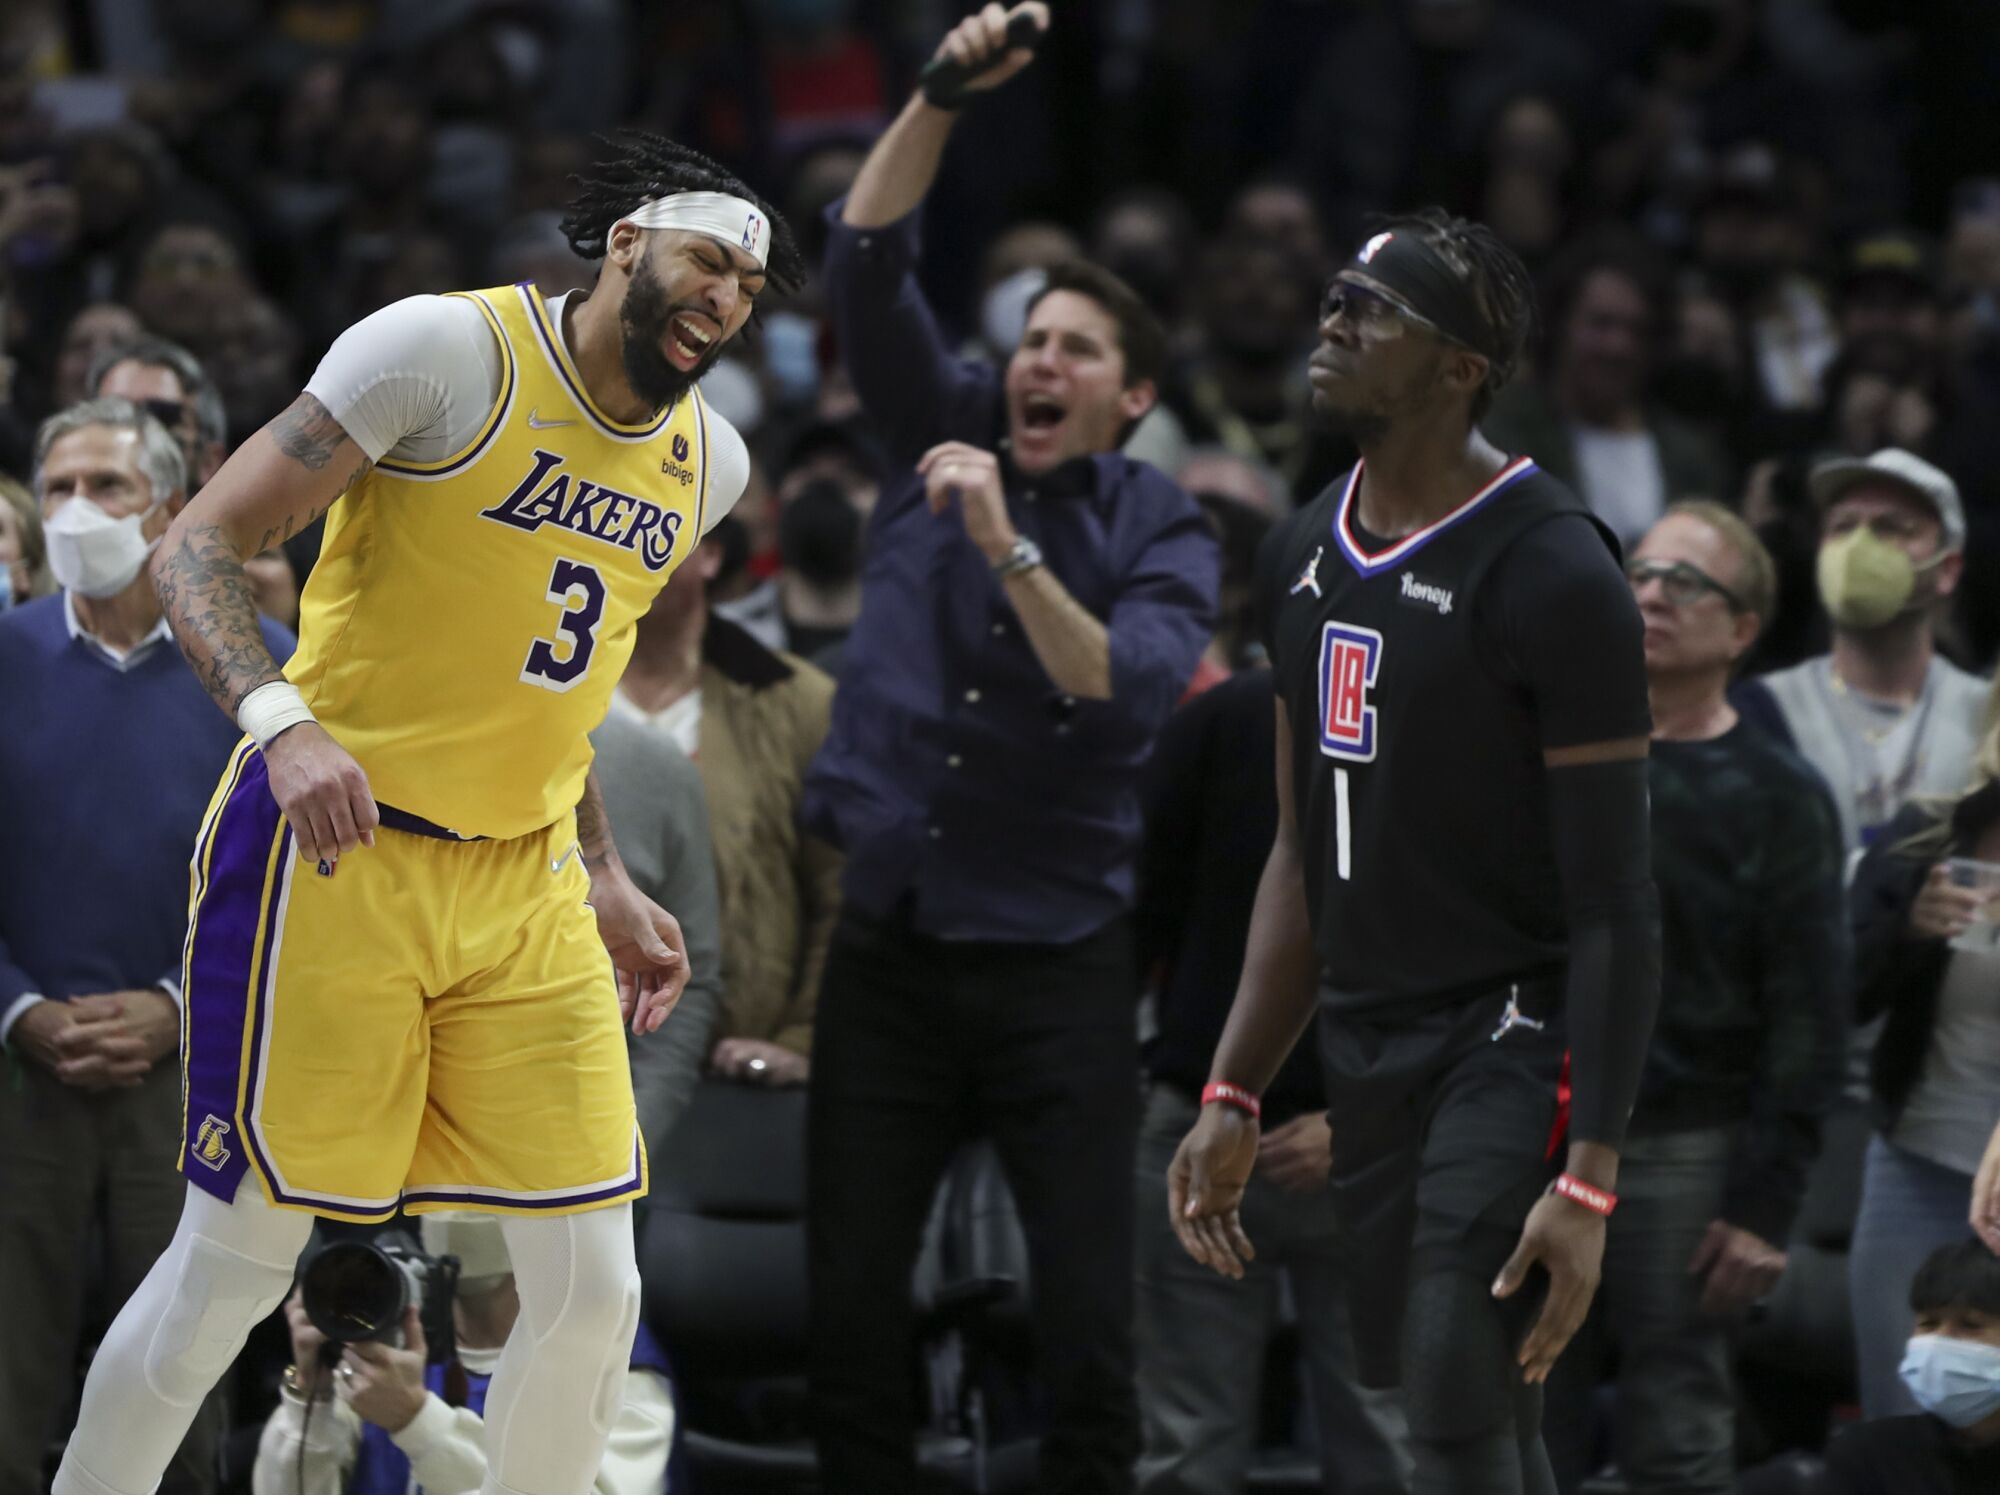 Lakers' Anthony Davis reacts after missing the potential game-winning shot while Clippers' Reggie Jackson appears satisfied.